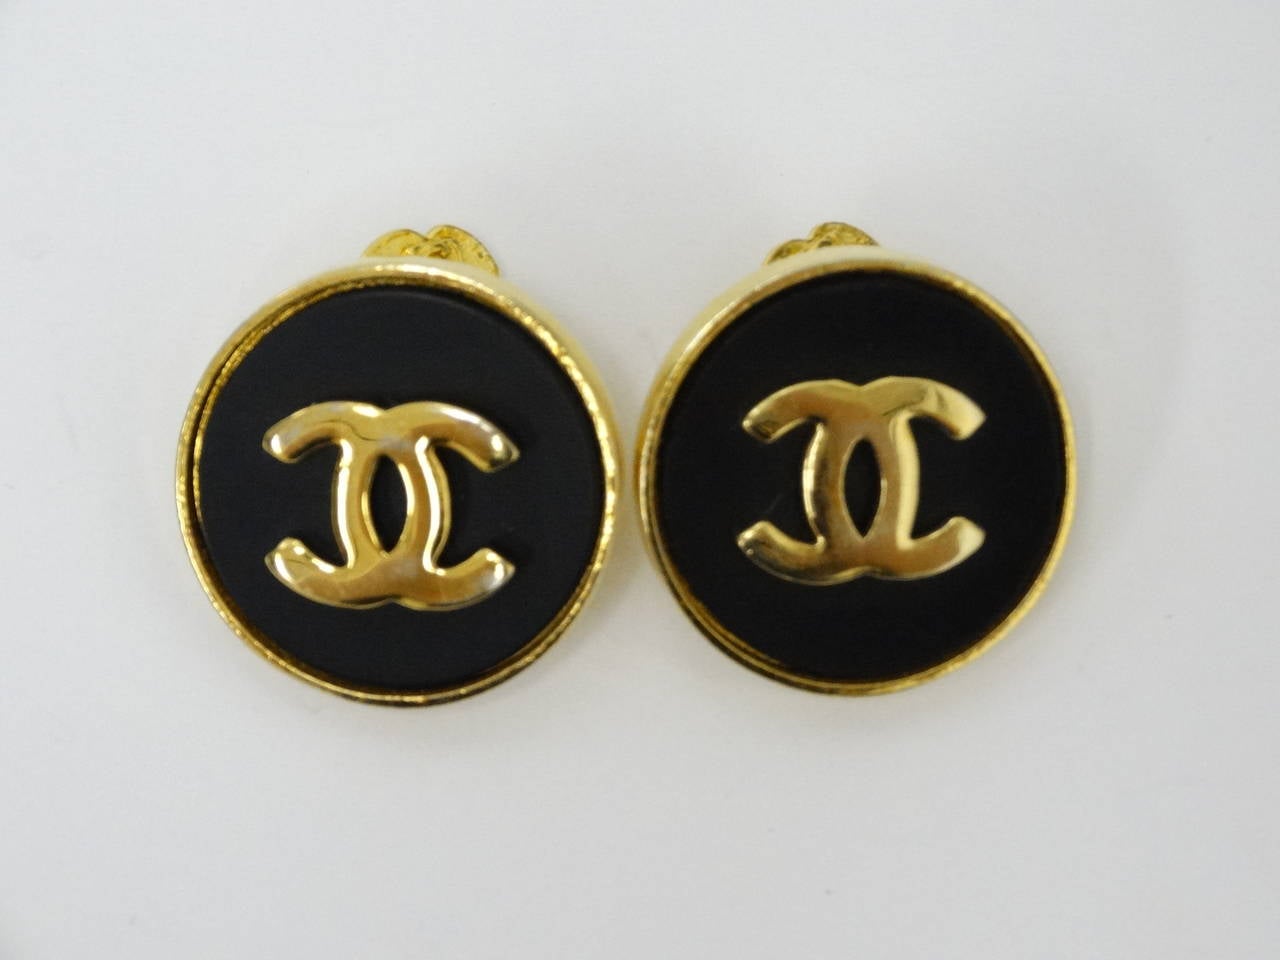 Add a touch of sophisticated flare to your professional attire/street style with this superb set of Chanel cuff links! They're fashioned from gold tone metal and black acrylic with signature C's and fasten with a Camelia flower toggle. Signed Chanel